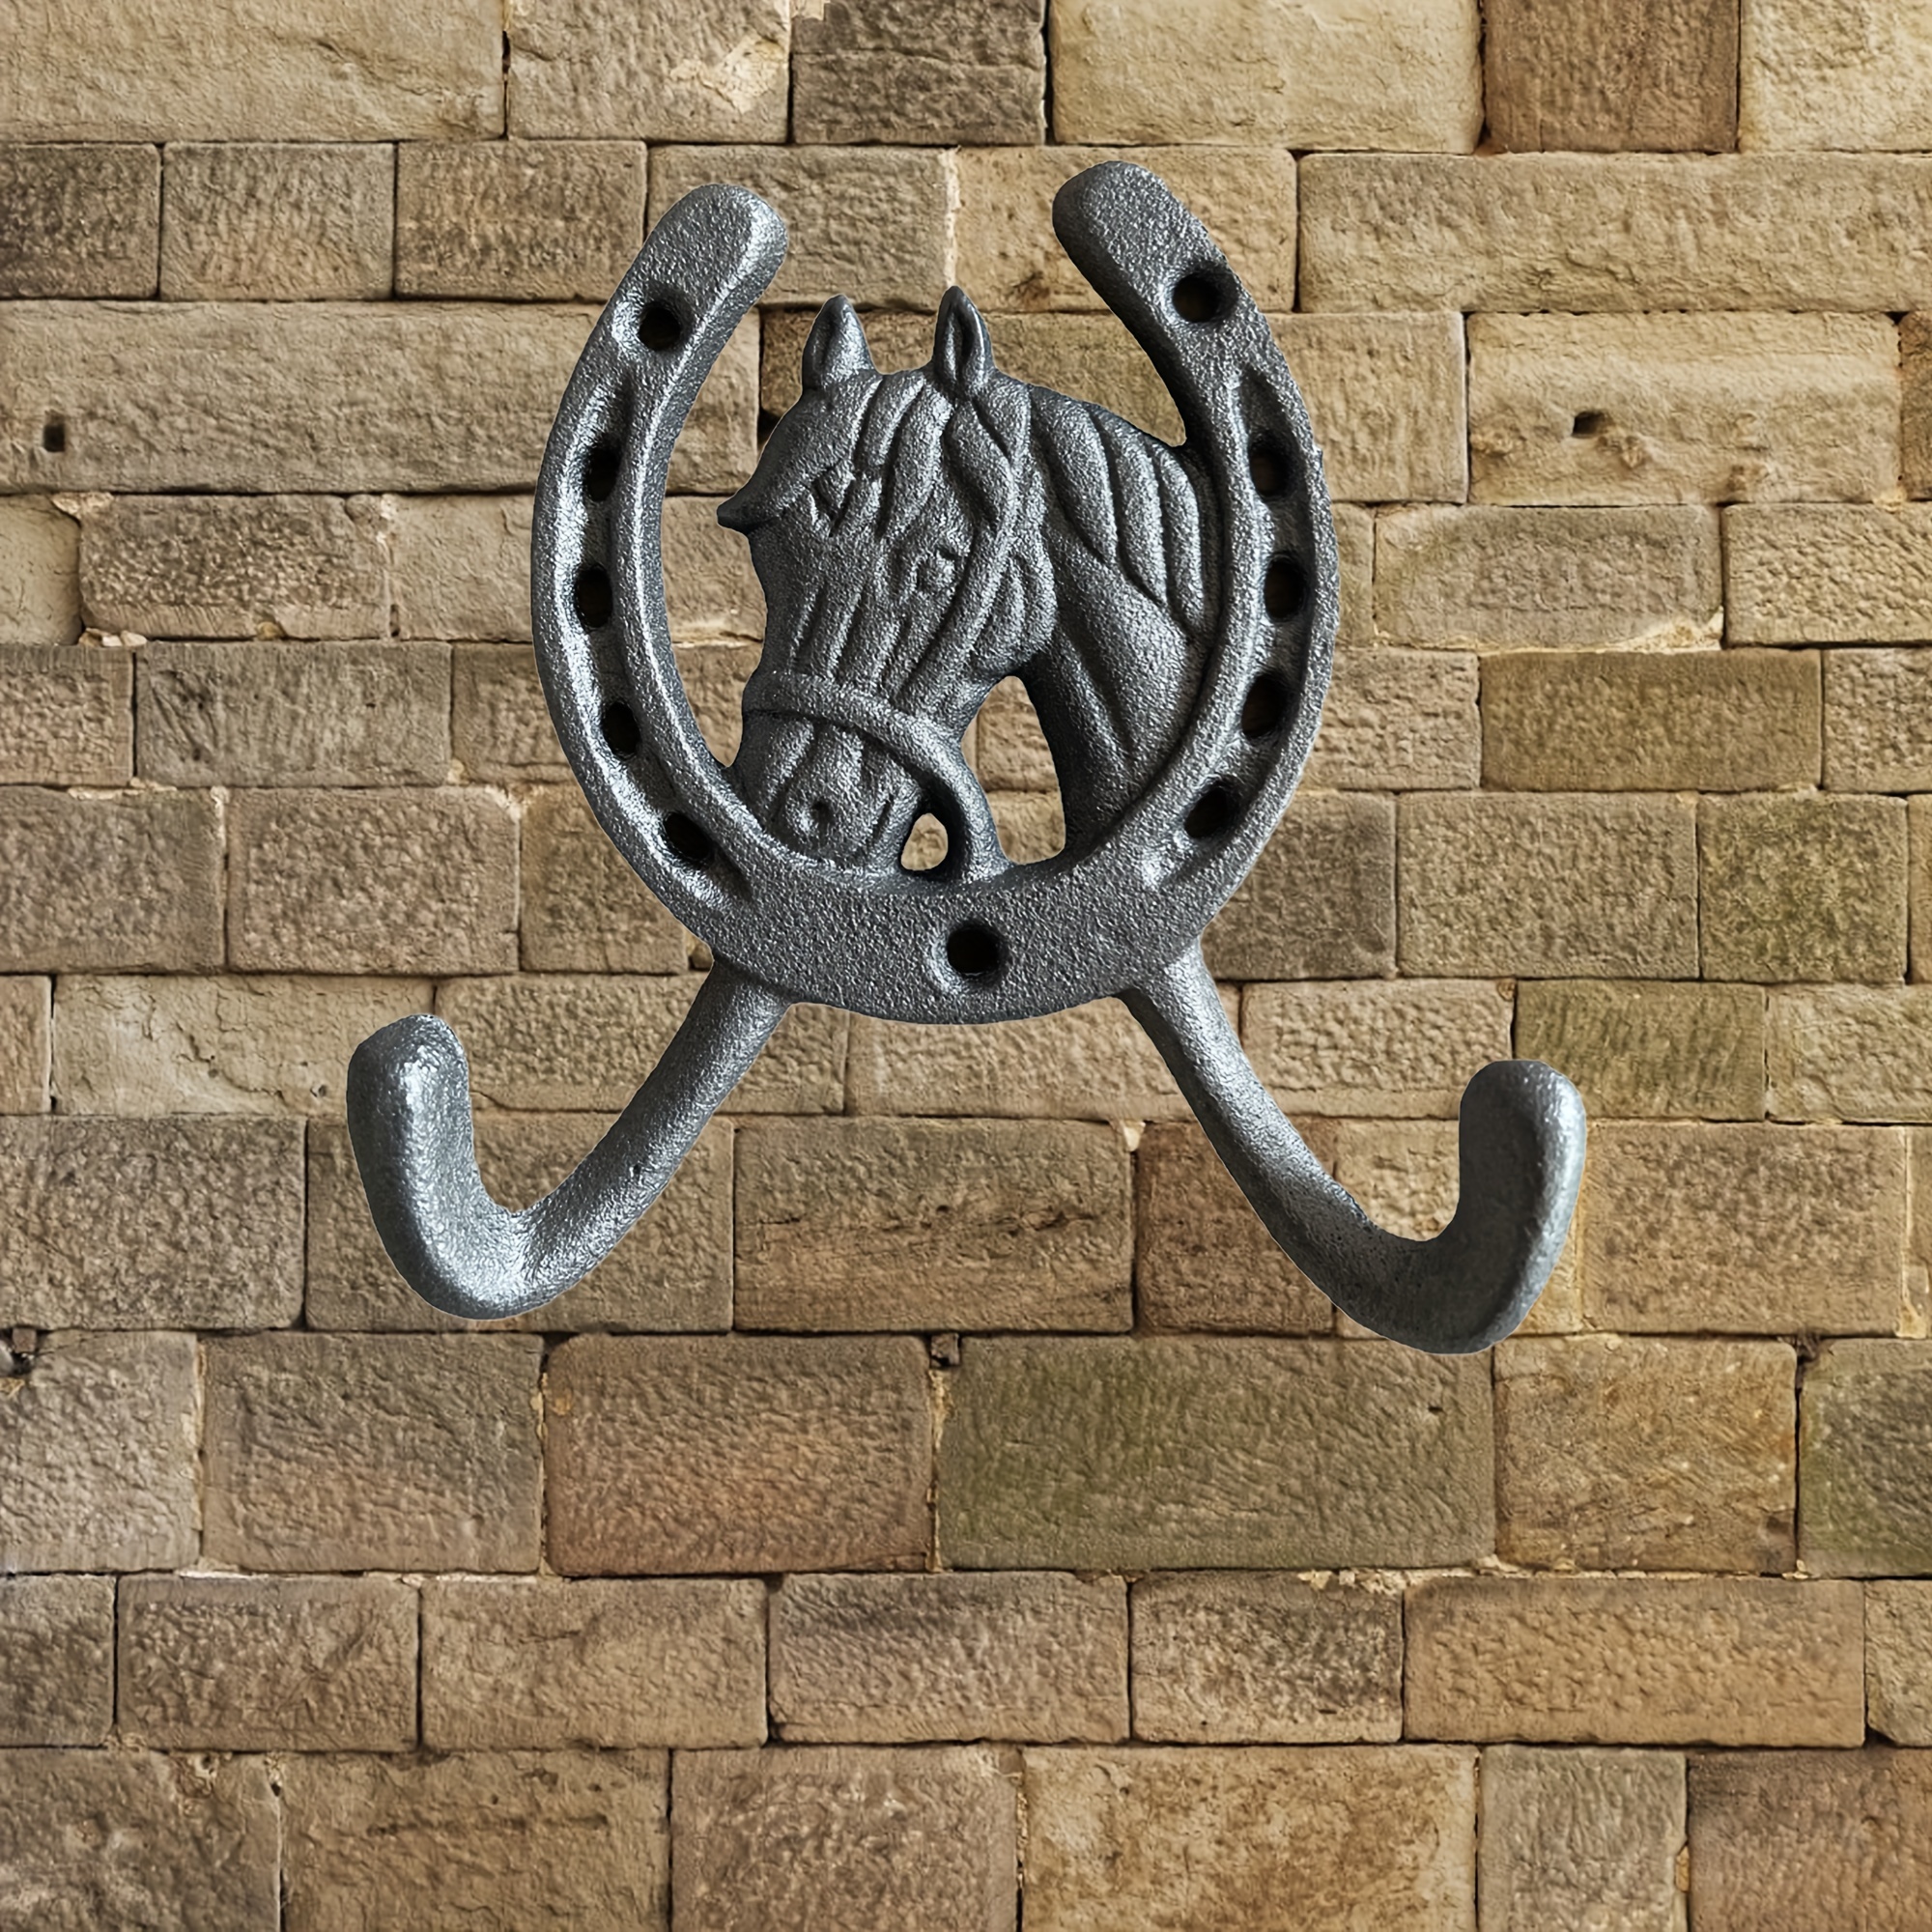 

Vintage Horse Head Cast Iron Wall Hook - Easy Install, Rustic Decor For Home & Garden, Perfect For Clothes, Towels & More